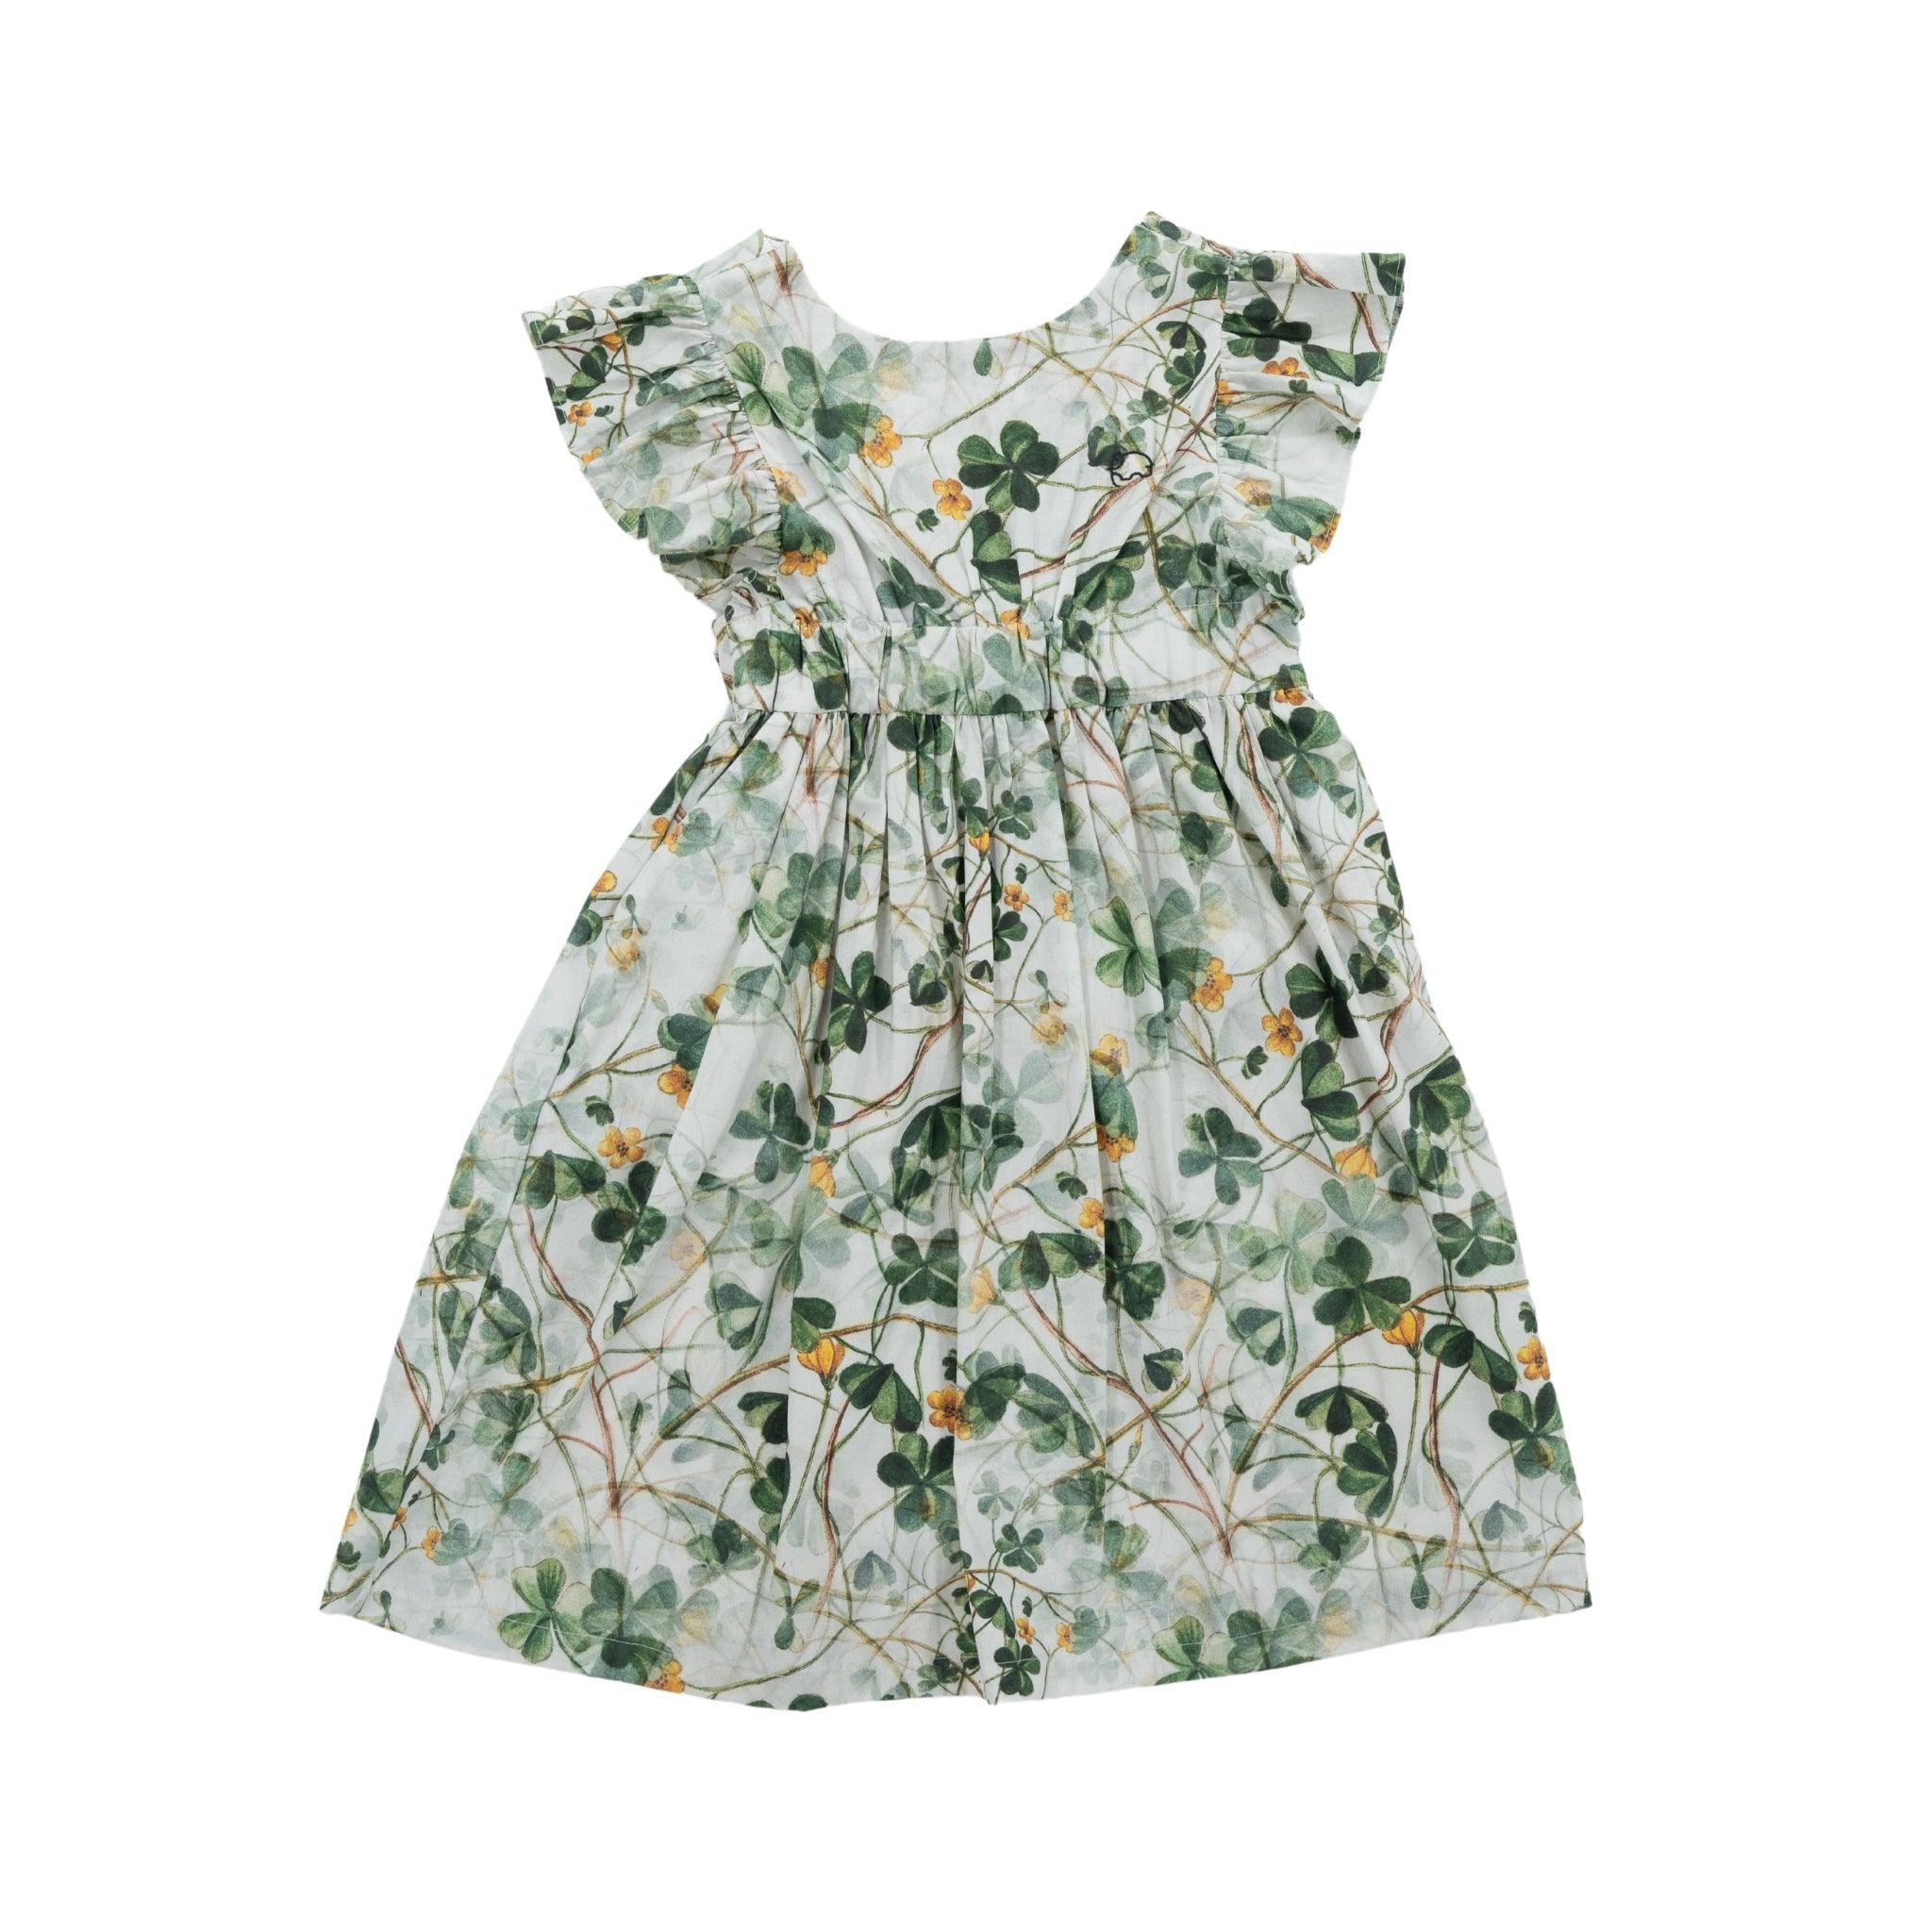 A Karee green floral cotton dress for girls with short sleeves and waist ribbon, isolated on a white background.